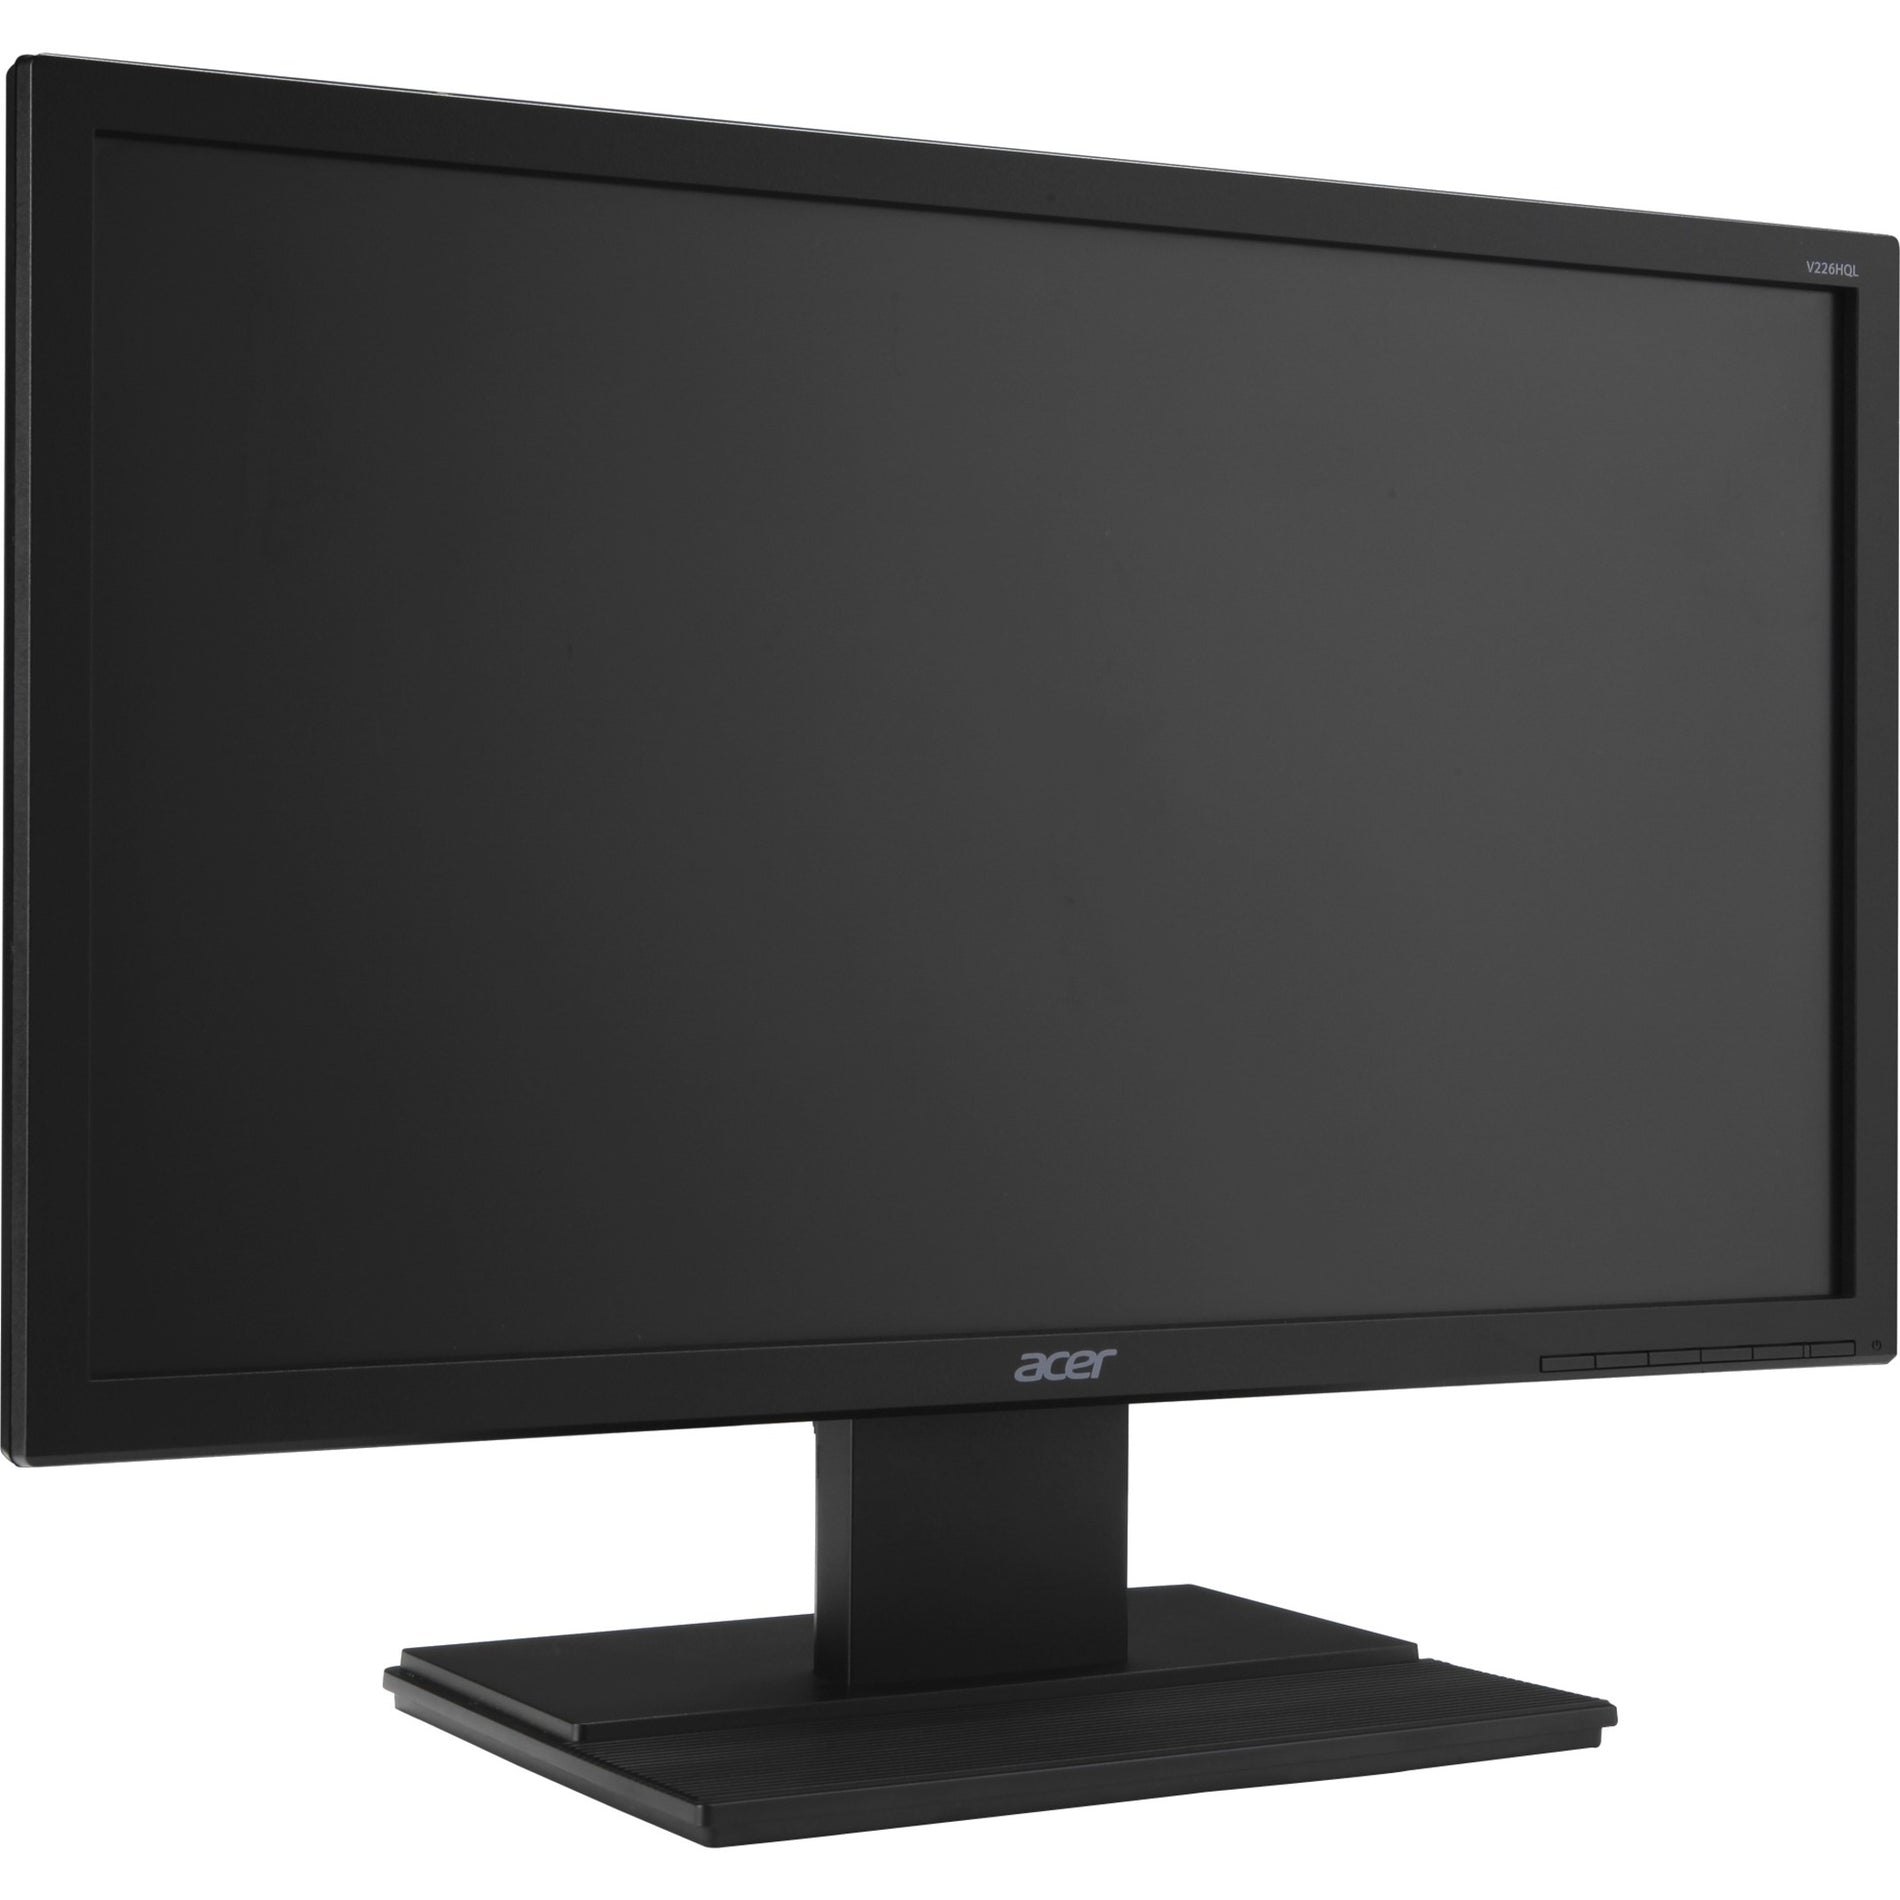 Acer UM.WV6AA.B01 V226HQL Widescreen LCD Monitor, 21.5" Full HD, 5ms Response Time, 100,000,000:1 Contrast Ratio